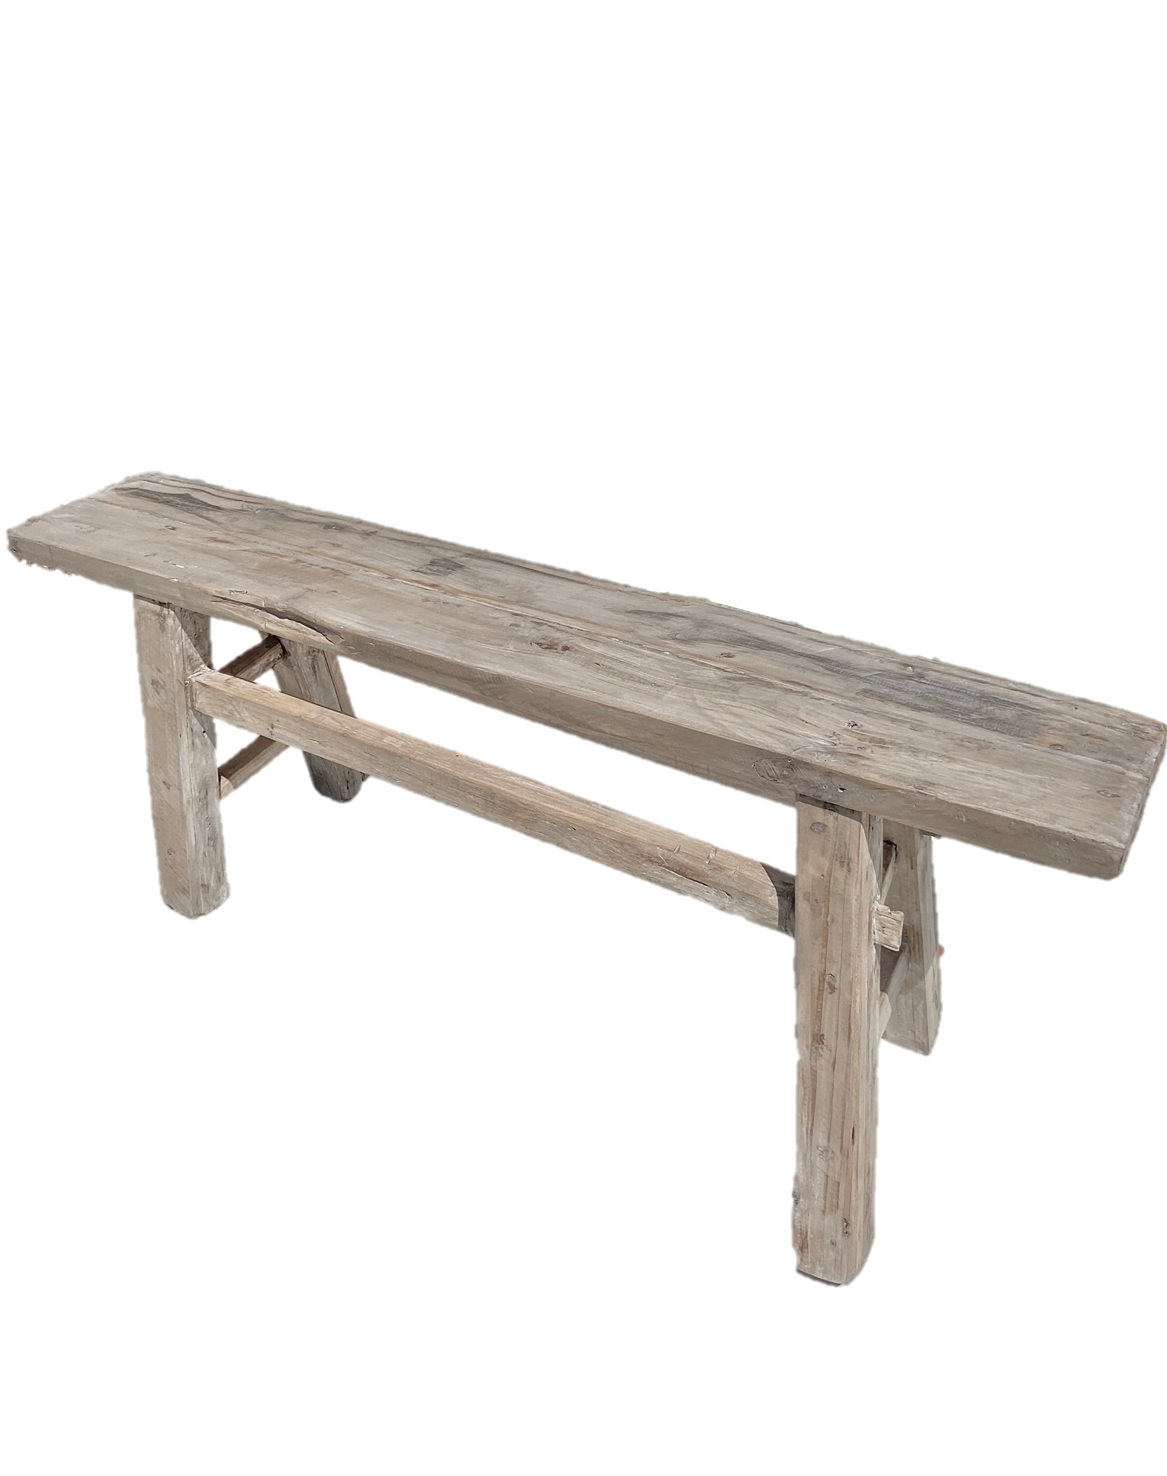 Rustic Bed Bench